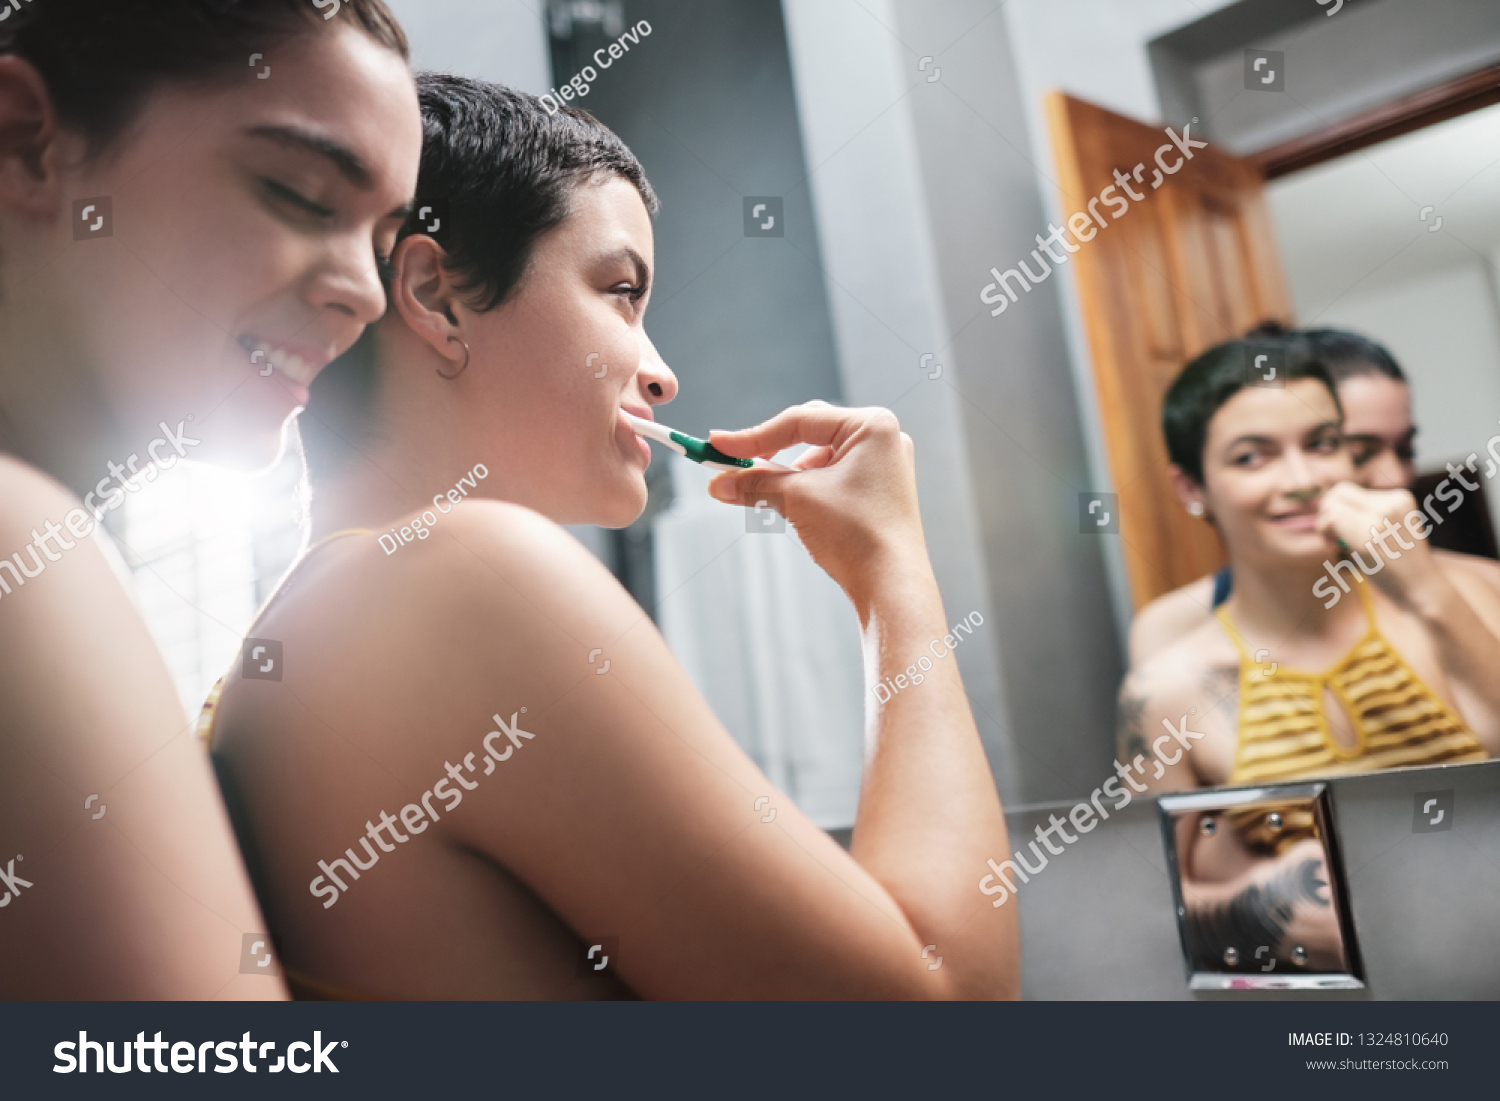 apurbo rozario add young lesbians in shower photo